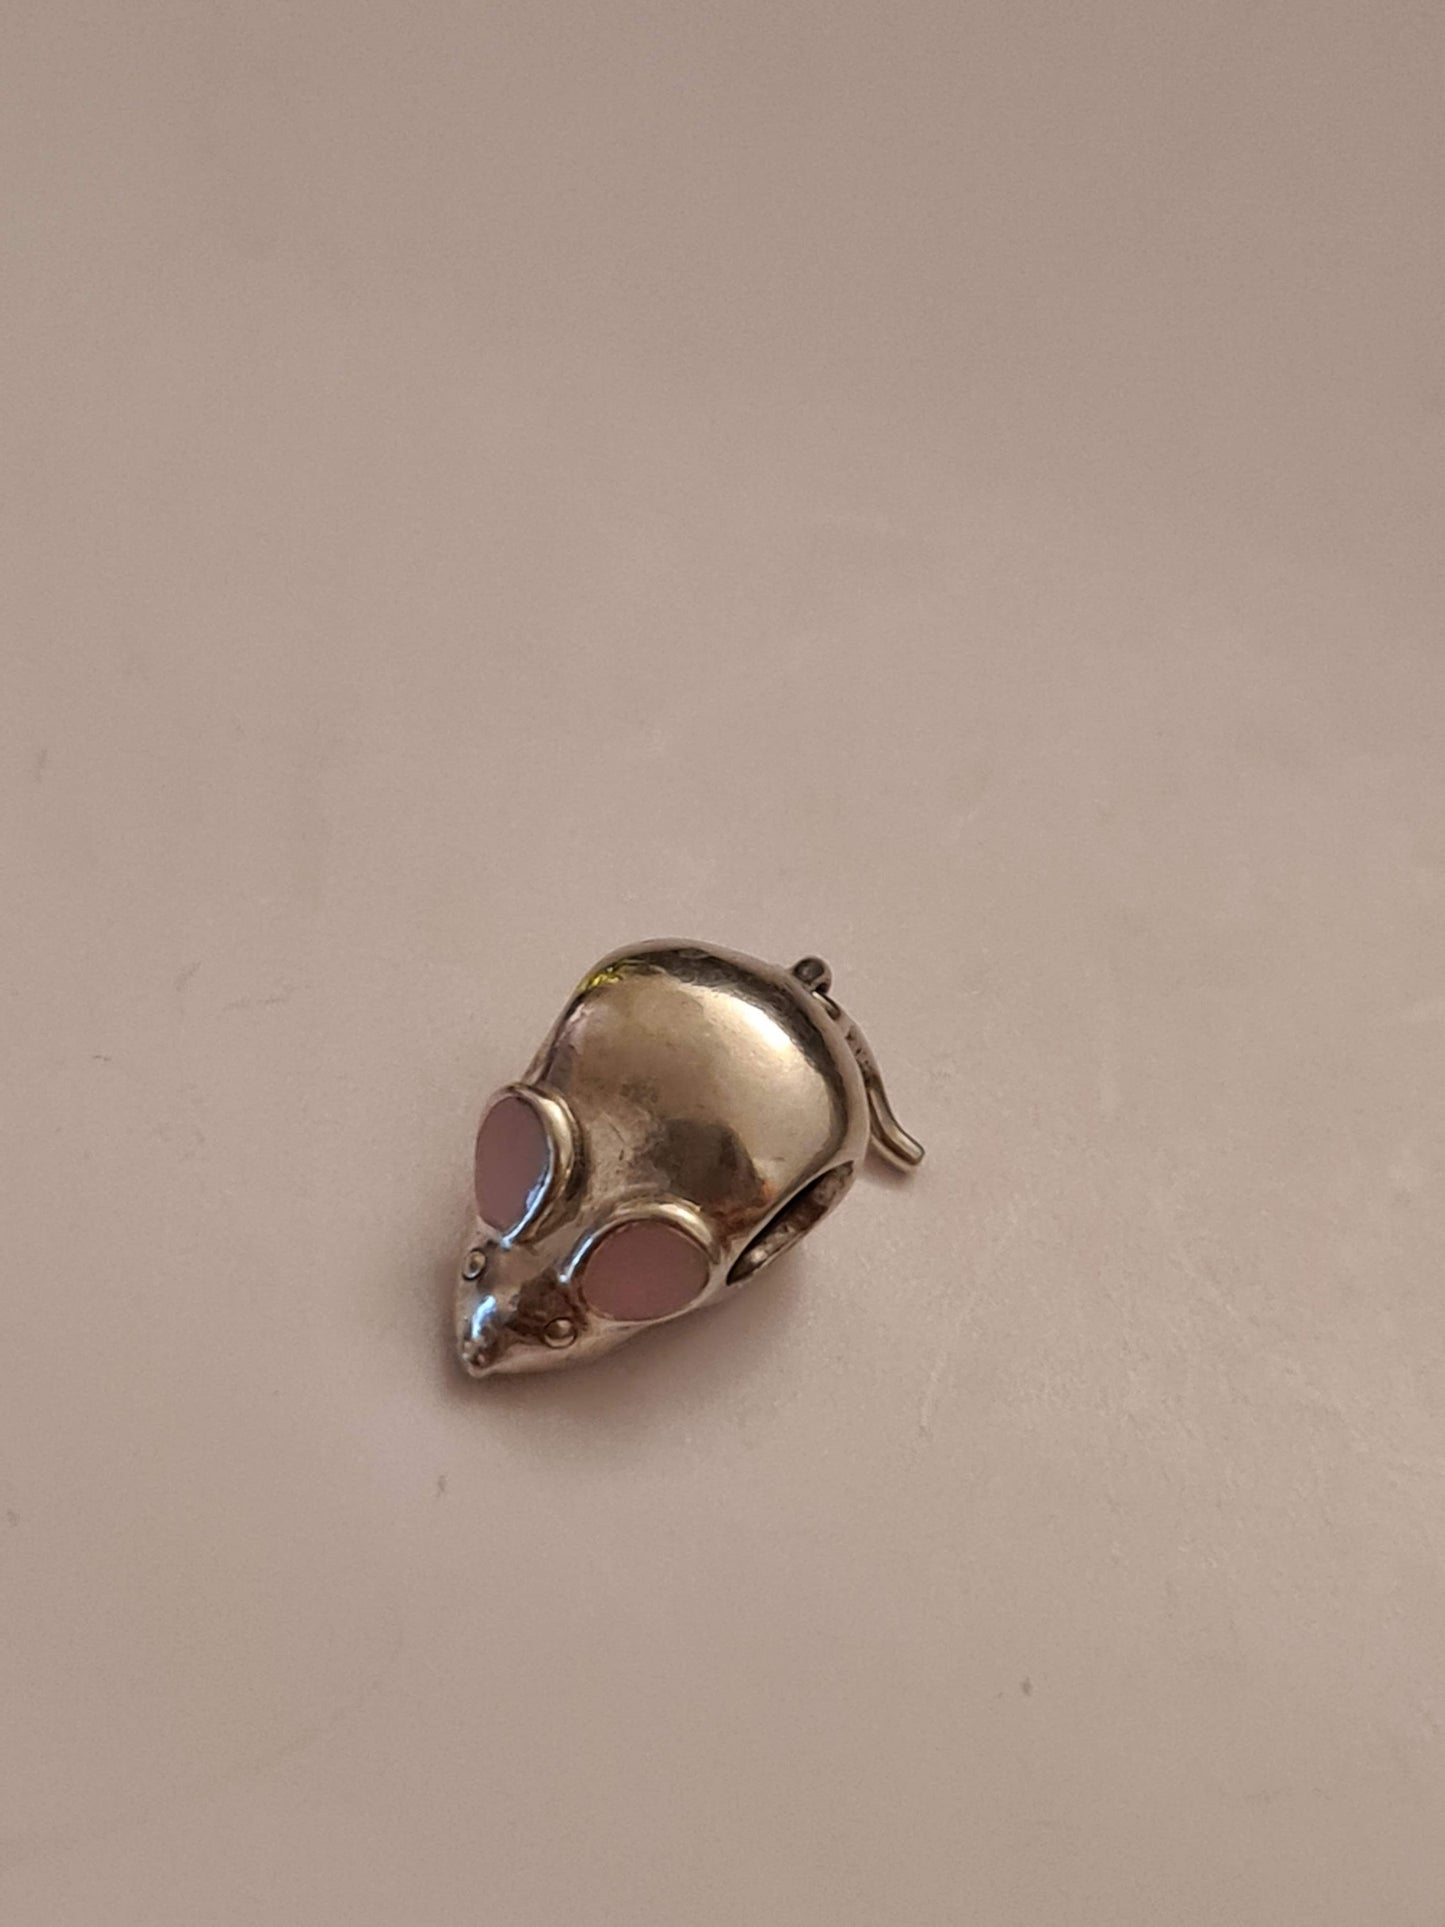 Genuine Pandora Mouse Charm with Moving Tail and Enamel Ears